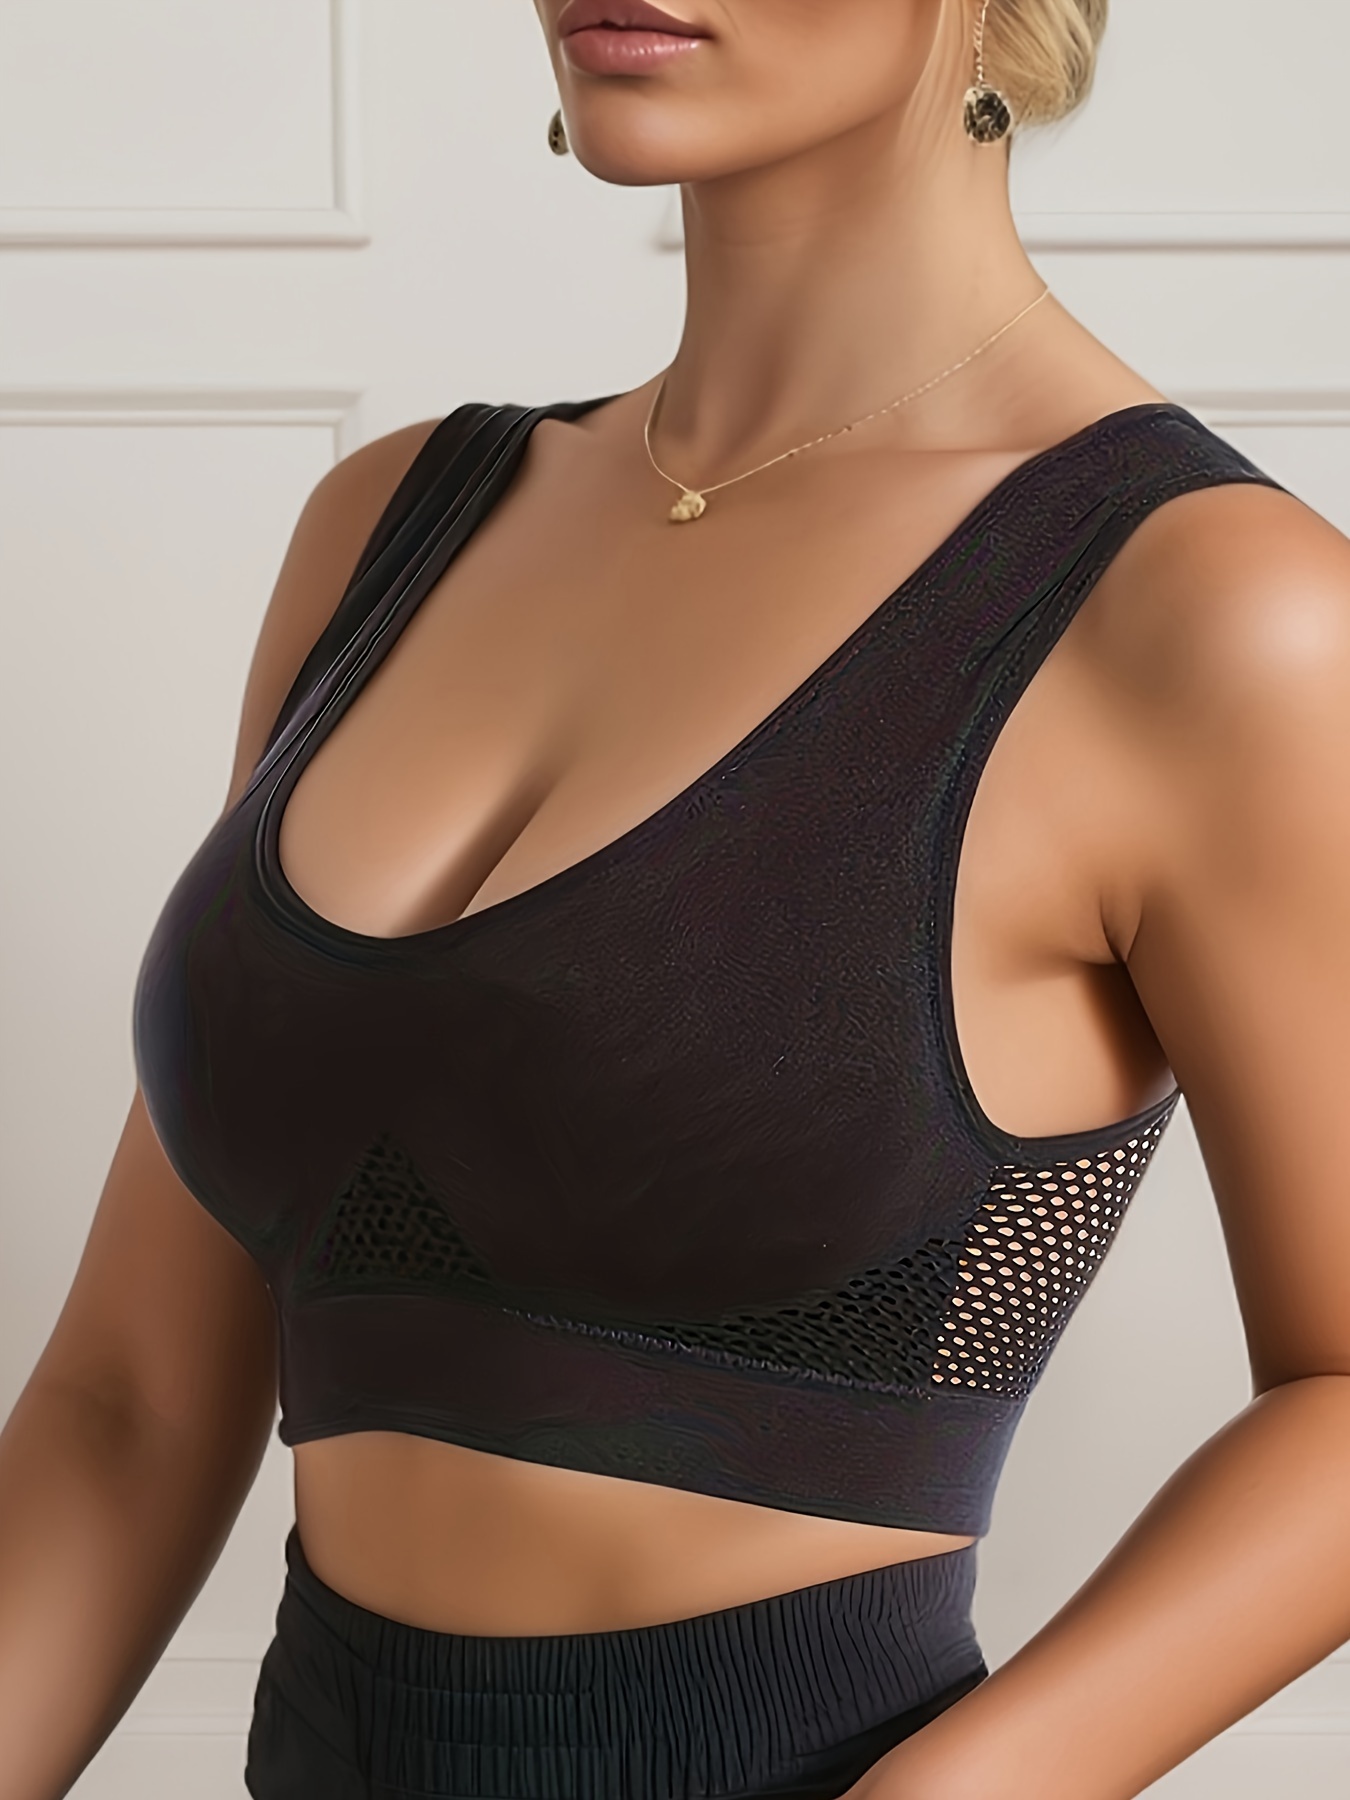 Sports Bras For Women Wirefree Mesh Breathable Underwear Fitness